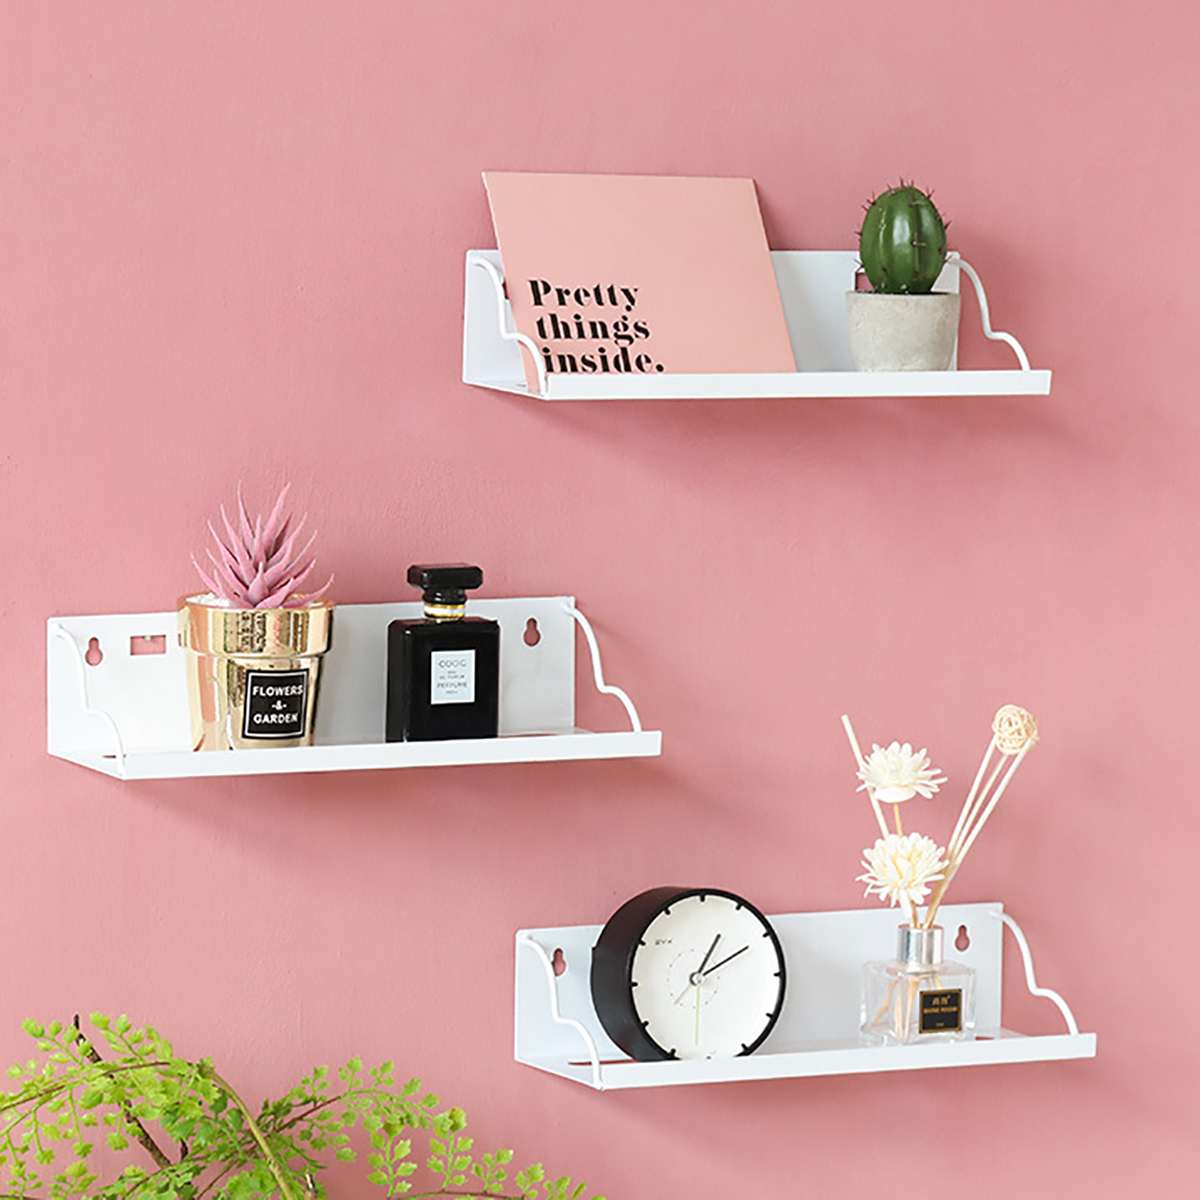 Floating Shelves Trays Bookshelves and Display Bookcase Modern Wood Shelving Units for Kids Bedroom Wall Mounted Storage Shelf